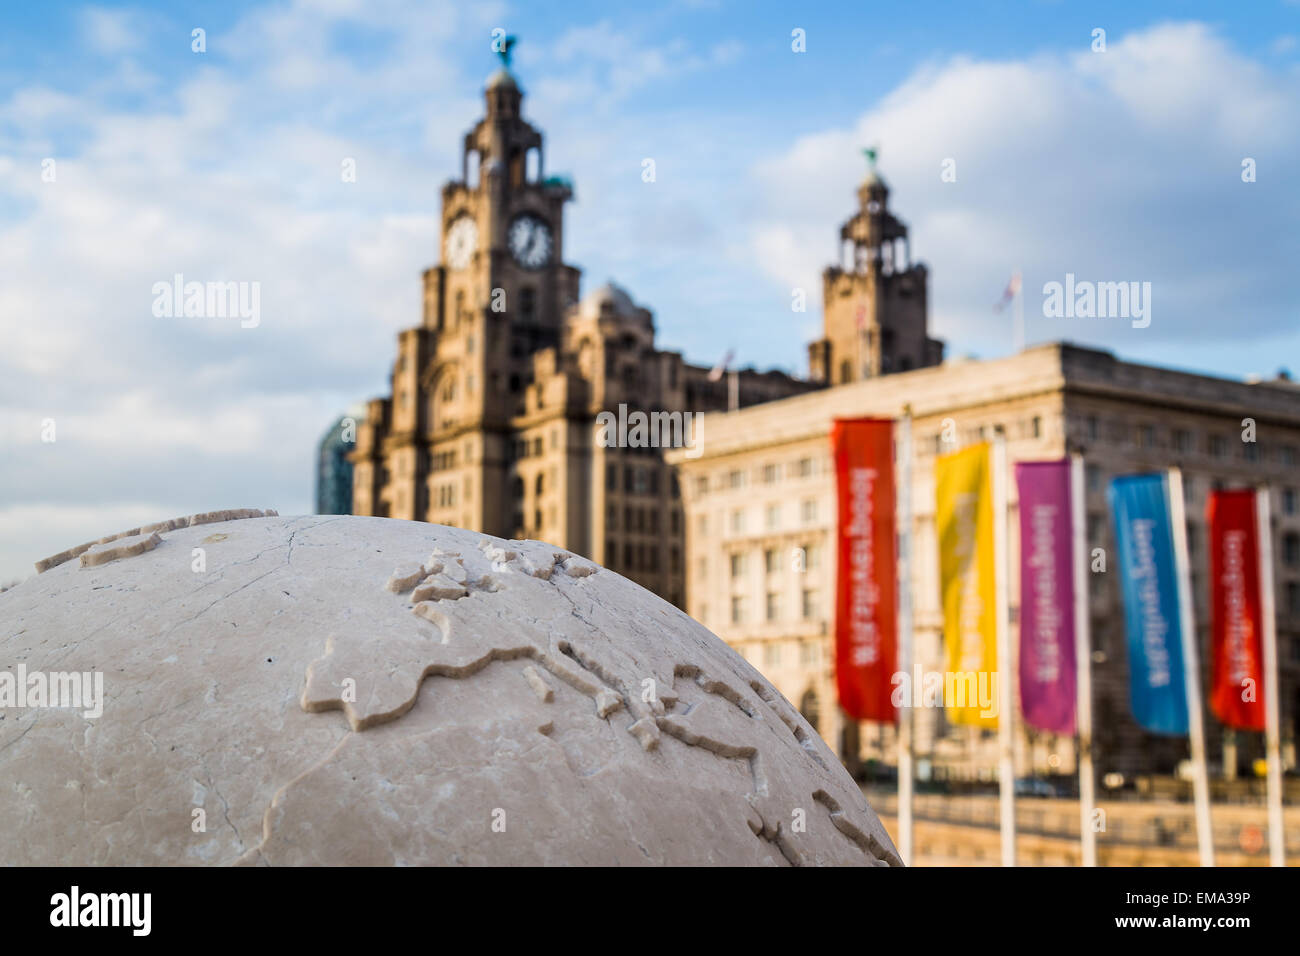 Globe statue in front of the Three Graces. Stock Photo